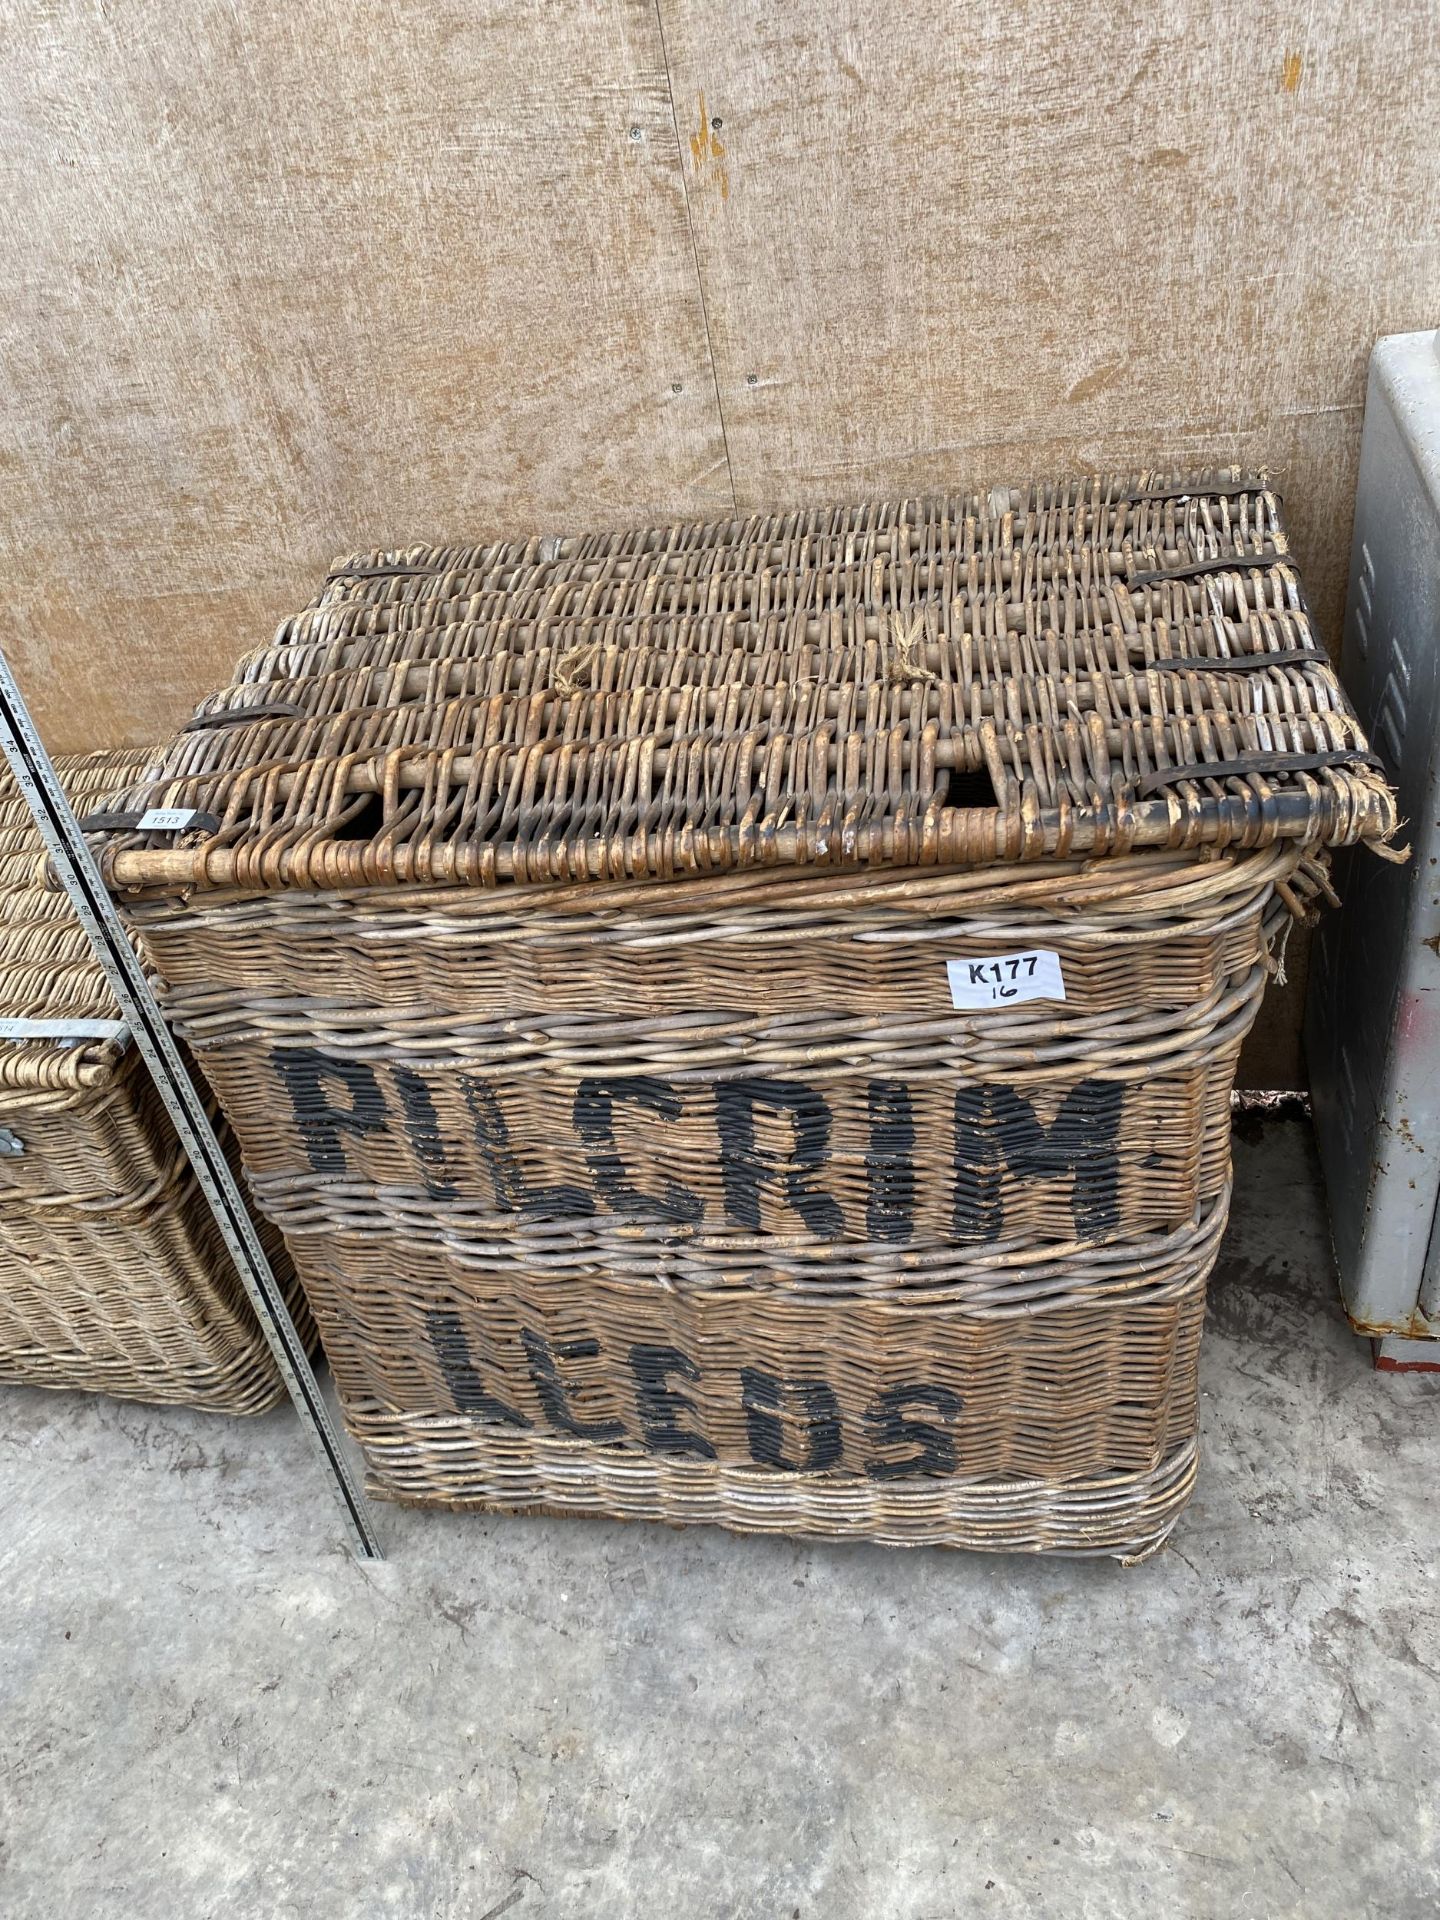 A LARGE ANTIQUE INDUSTRIAL MILL BASKET BASKET WITH HINGED LID AND METAL BANDING BEARING THE LABEL '